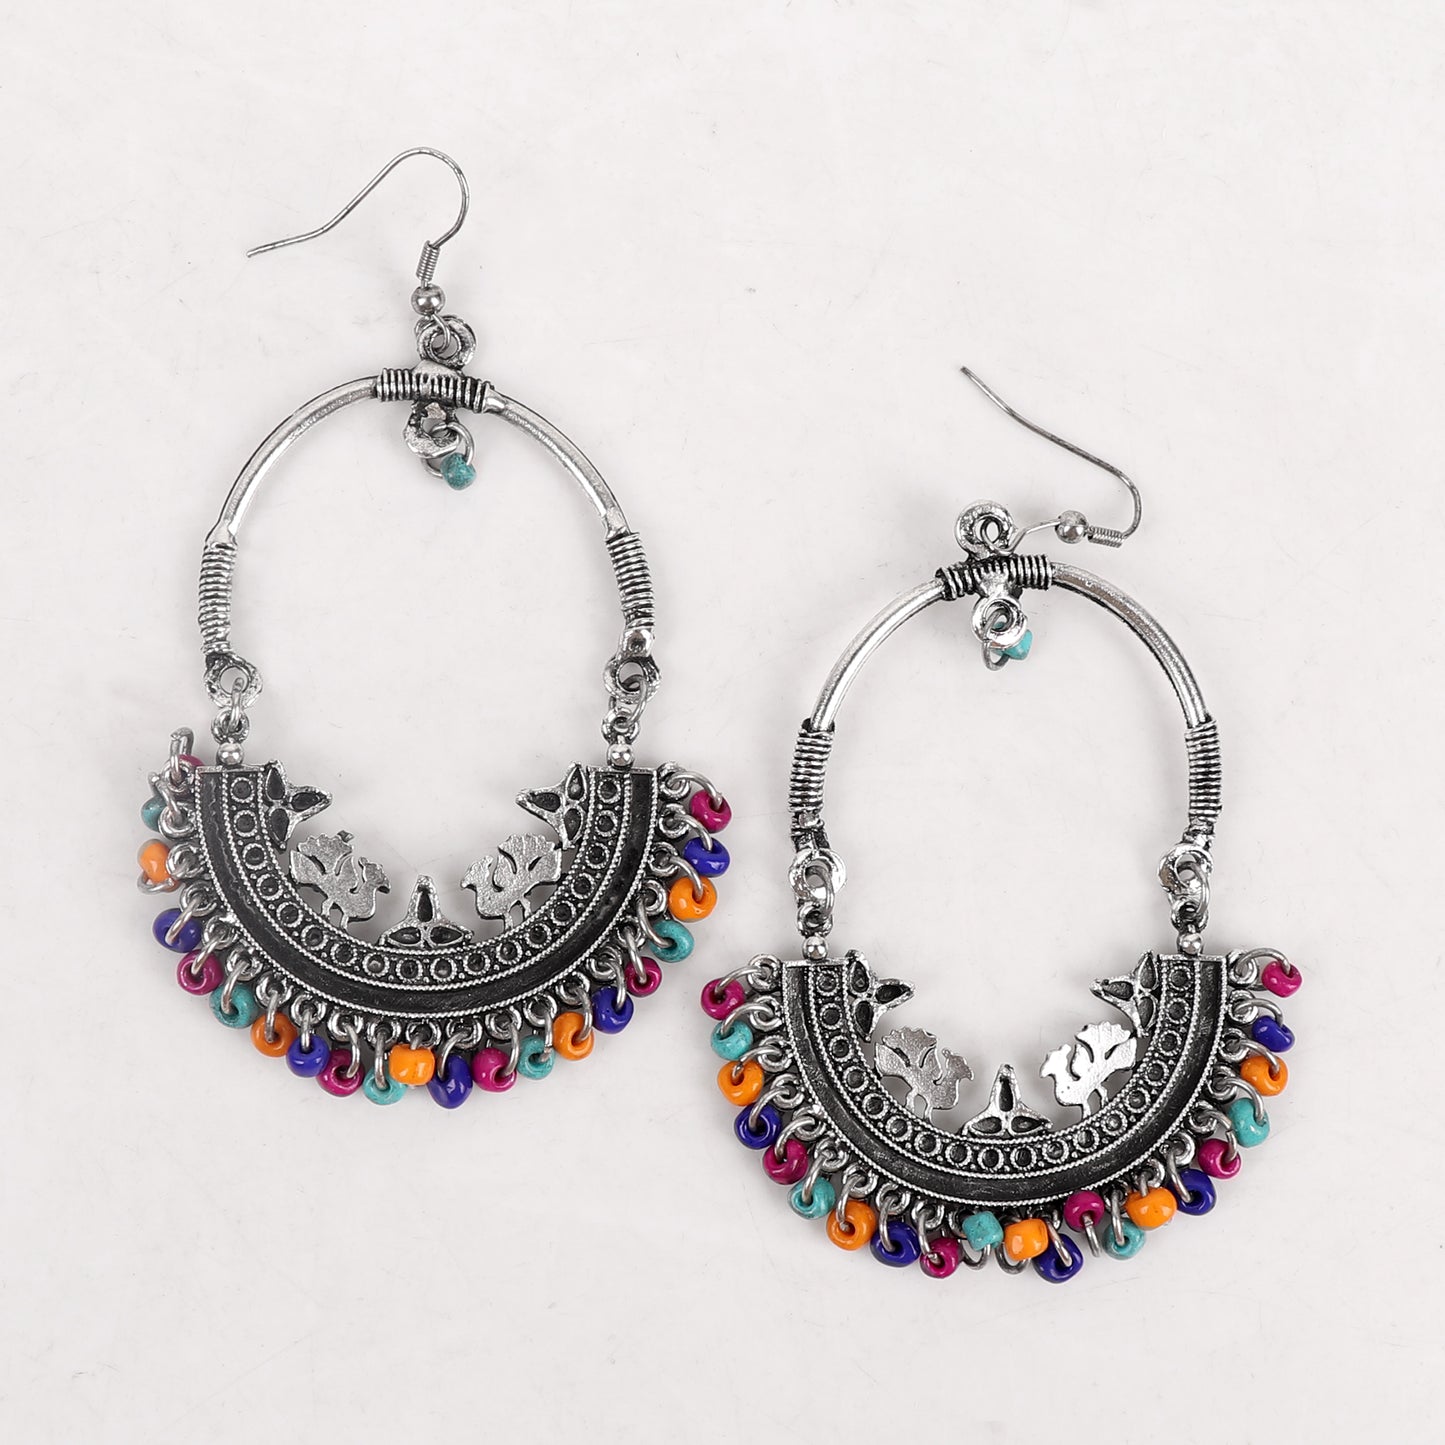 Earrings,Afghan Inspiration Baali with multicolored beads - Cippele Multi Store